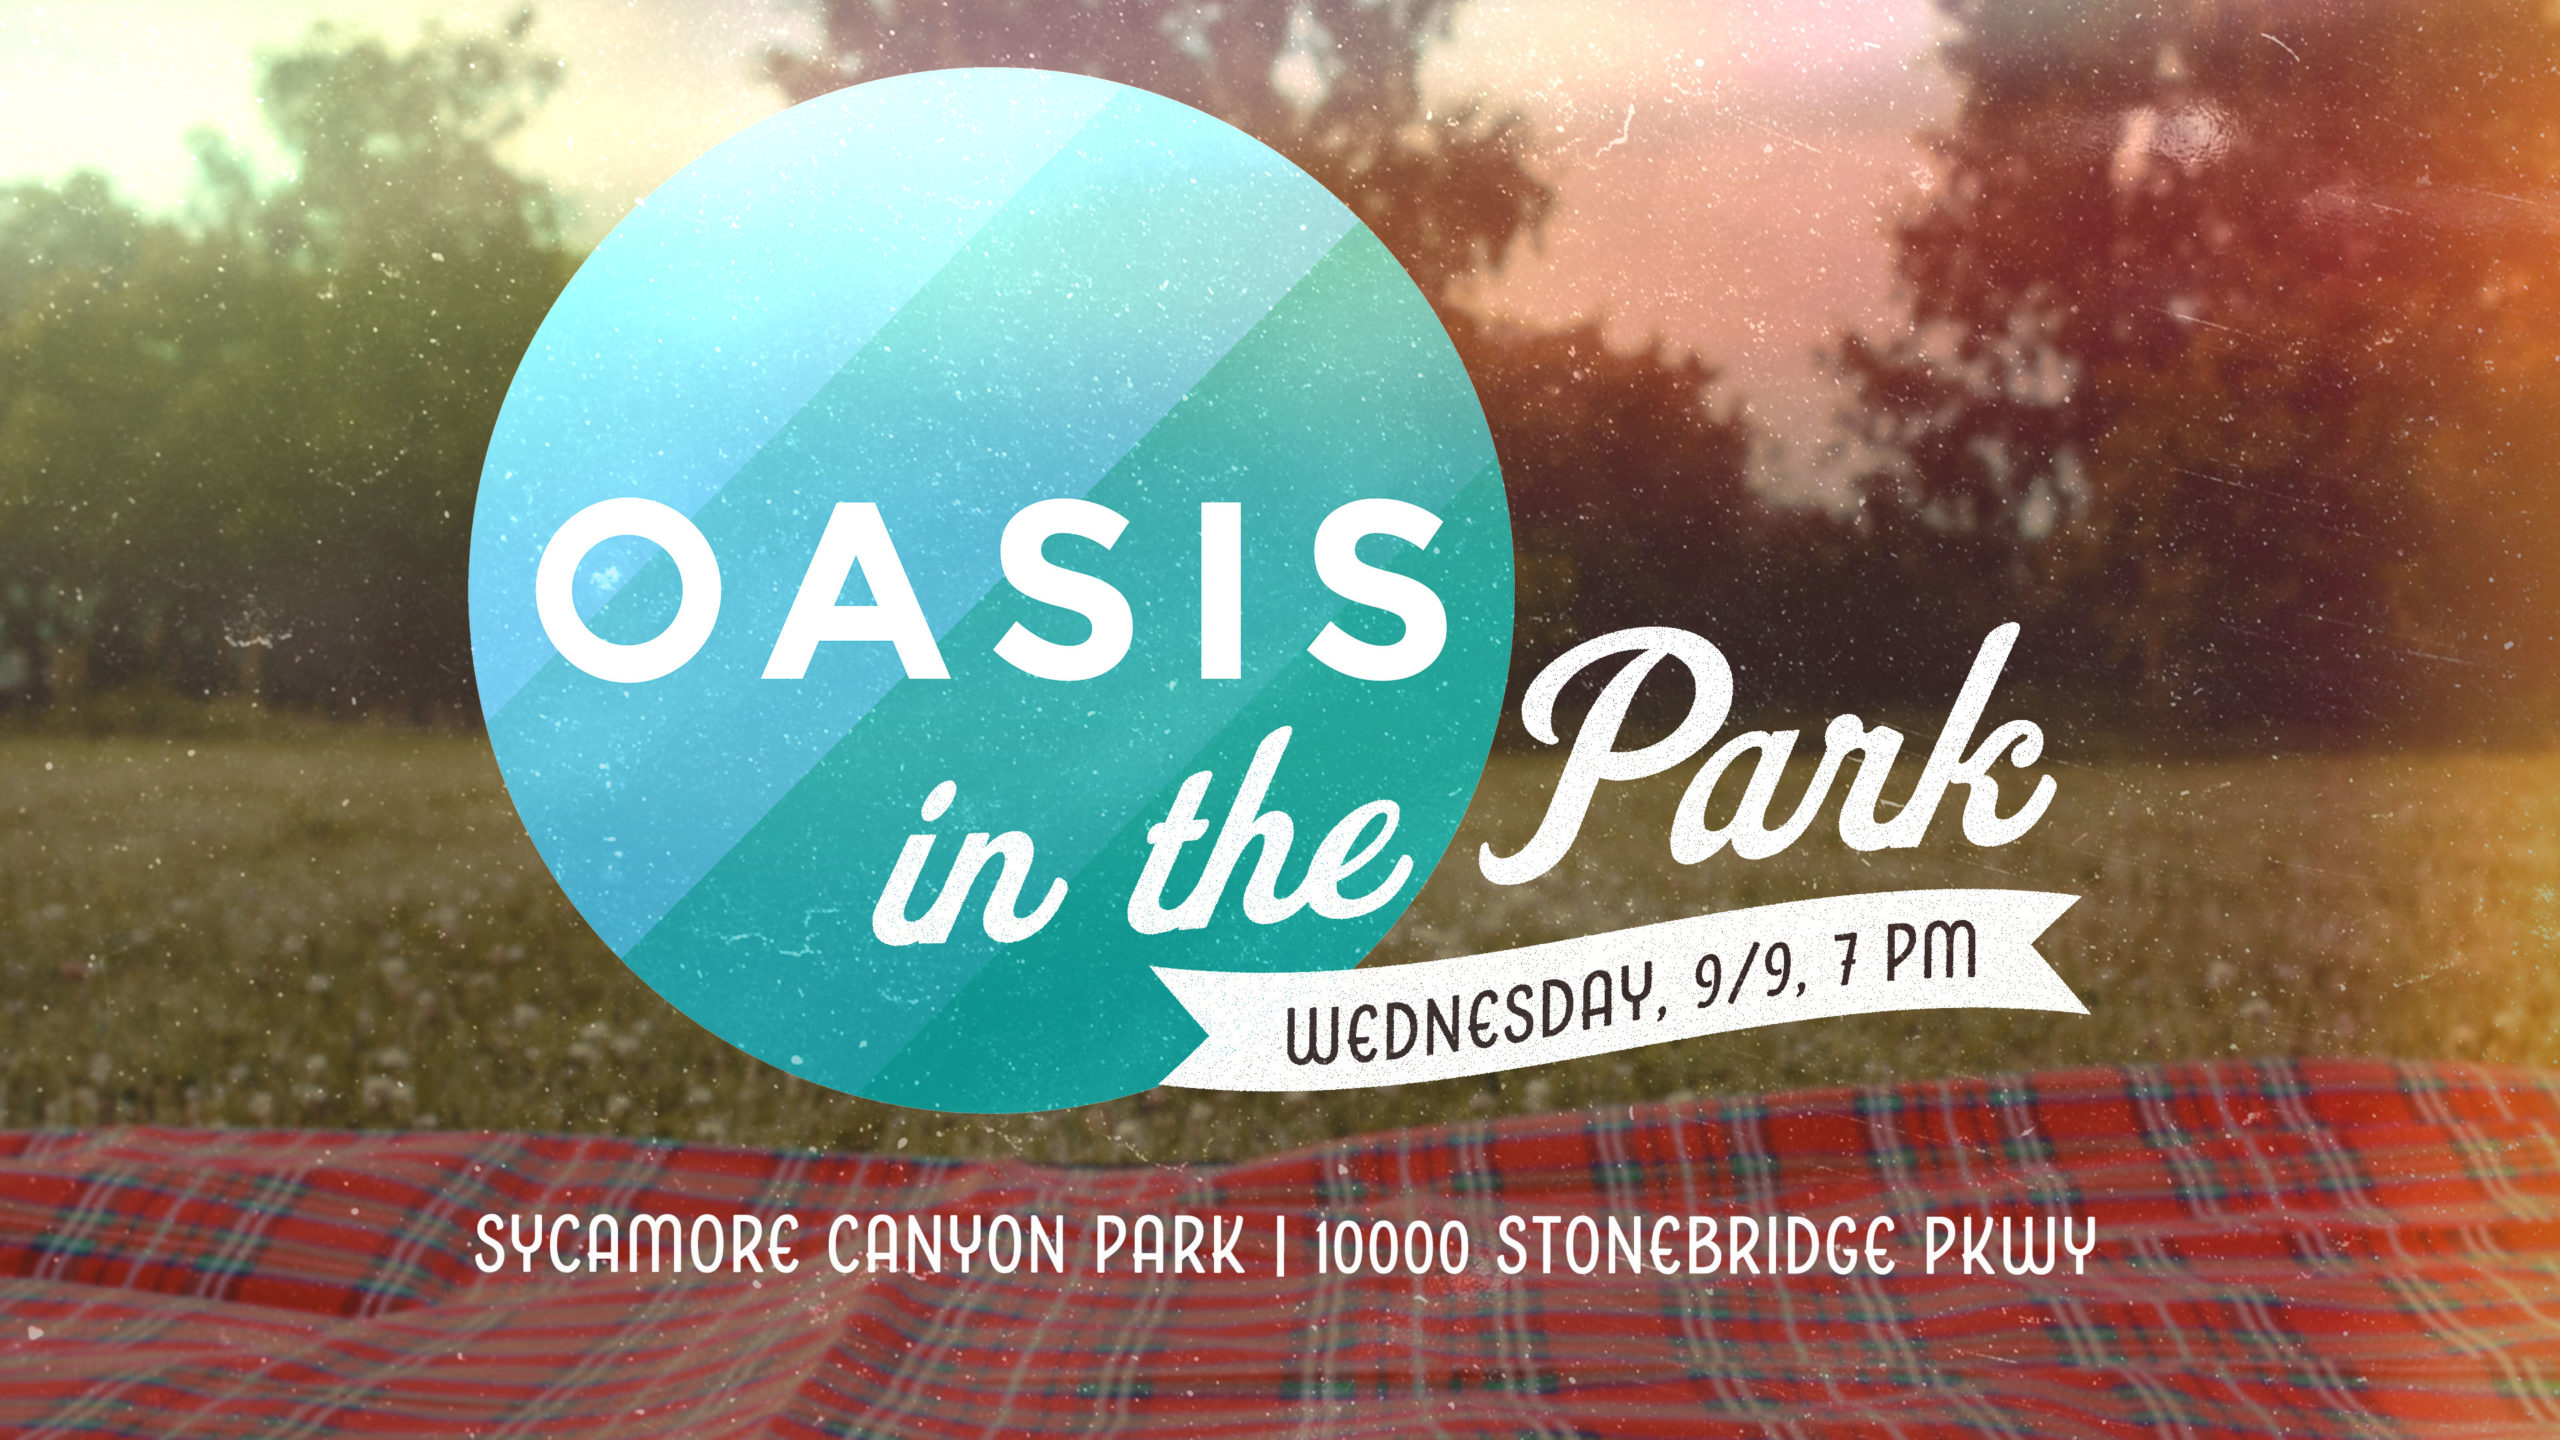 Oasis in the Park